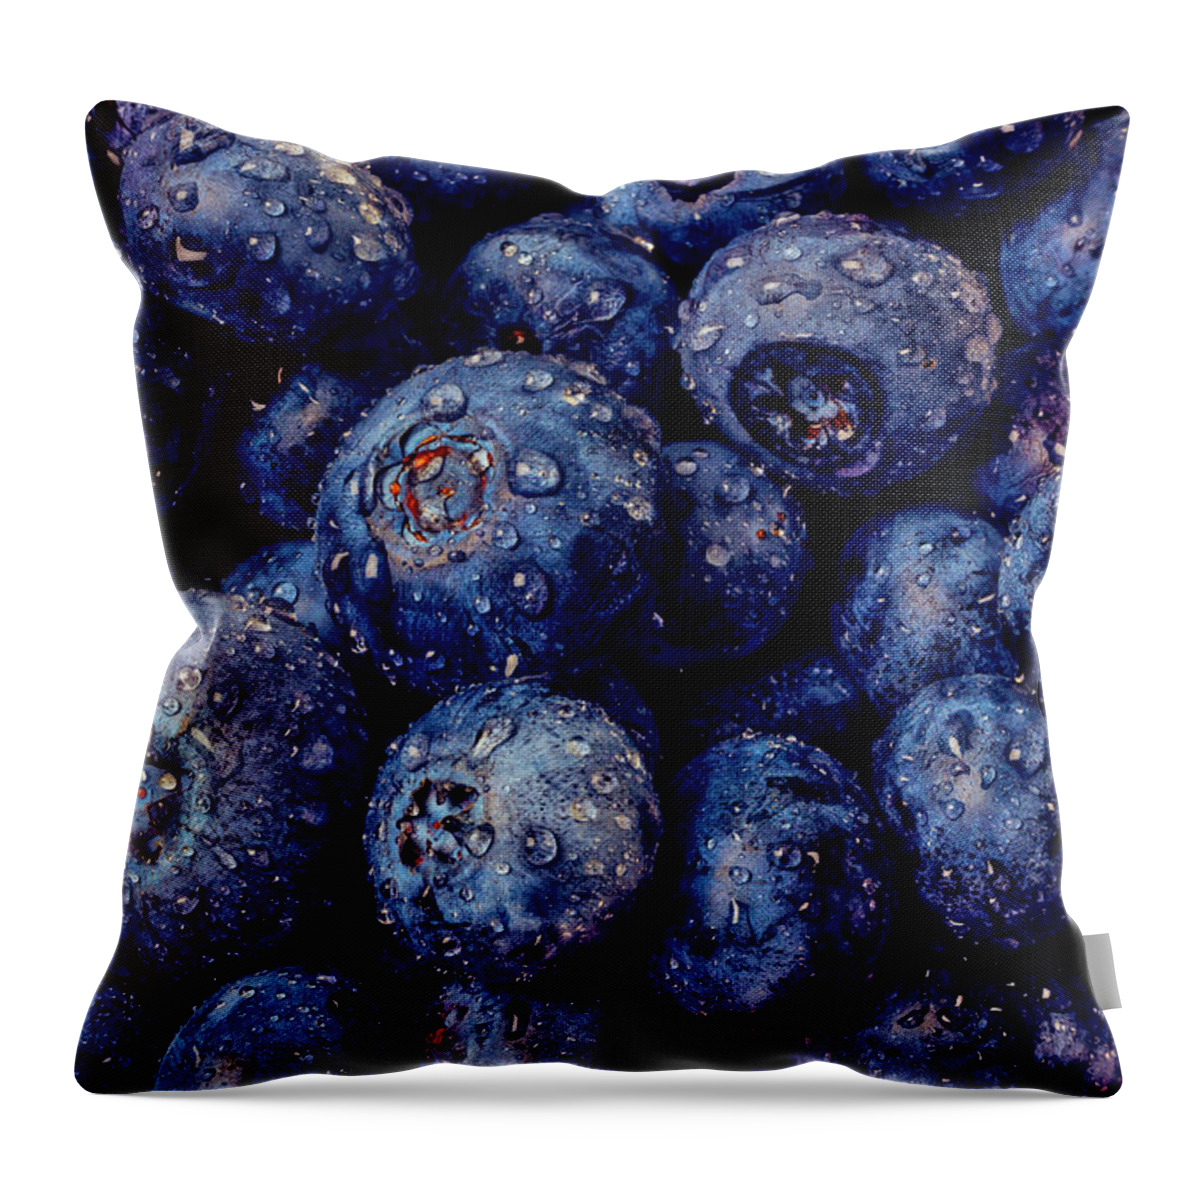 Blueberries Throw Pillow featuring the photograph Dew Covered Blueberries by Garry Gay